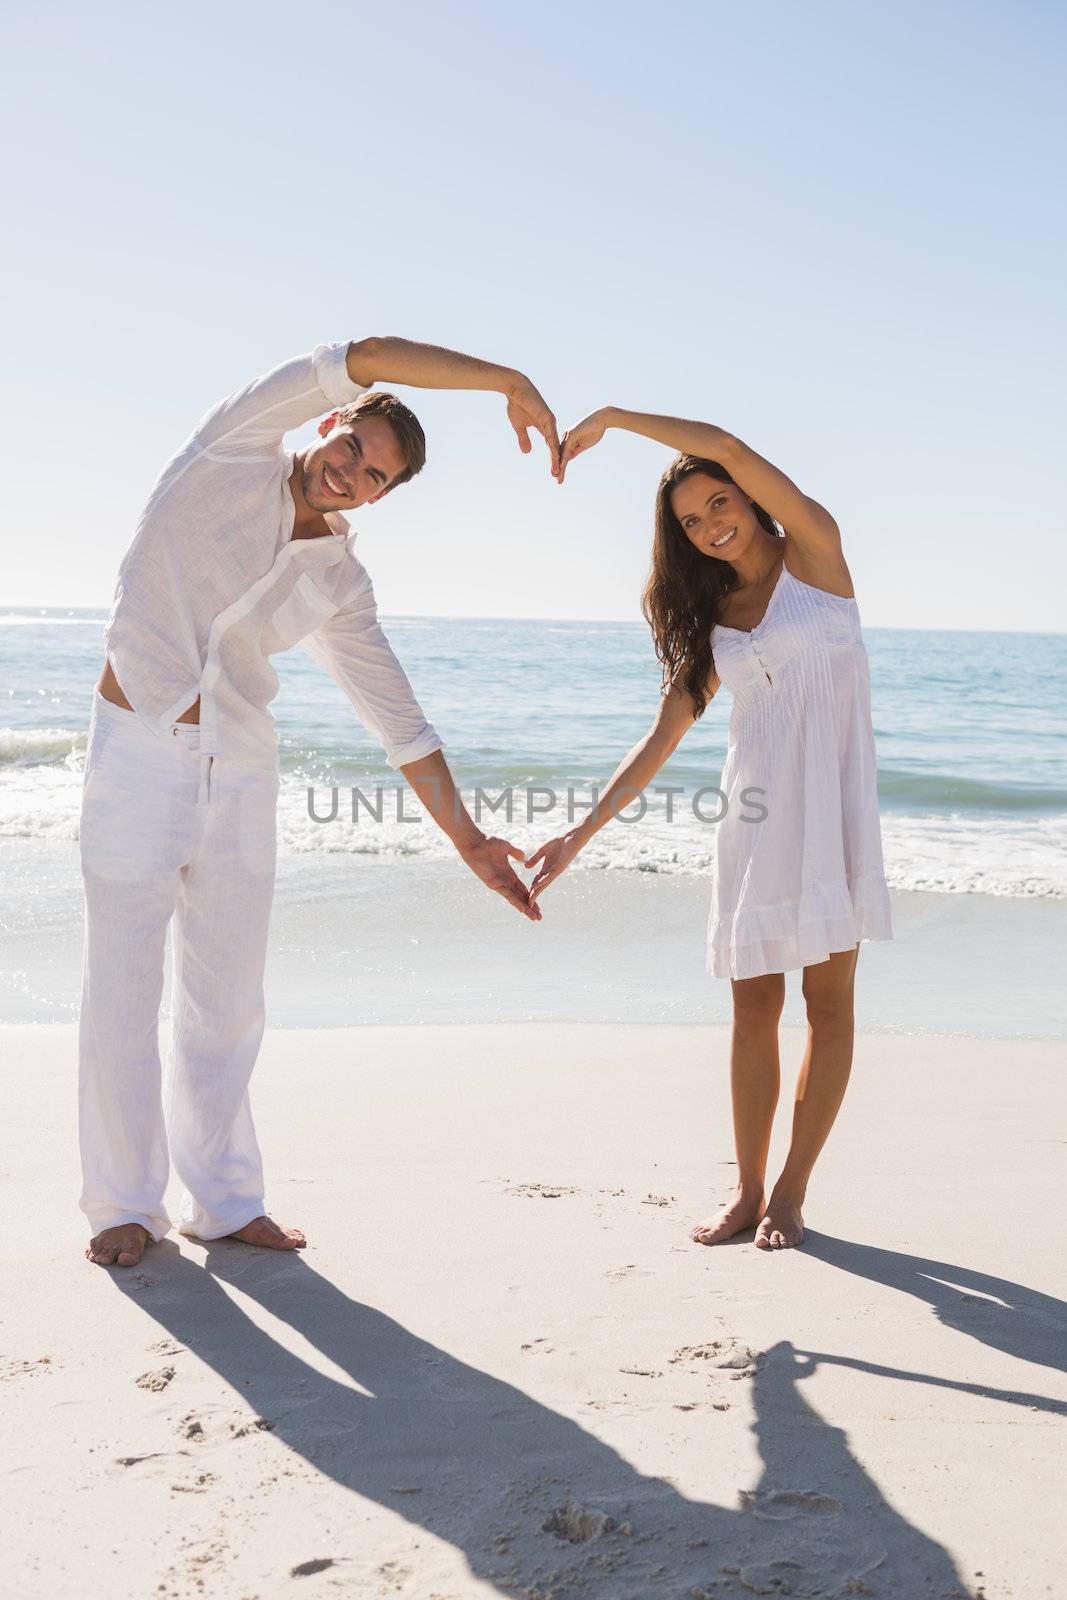 Romantic couple forming heart shape with arms at the beach